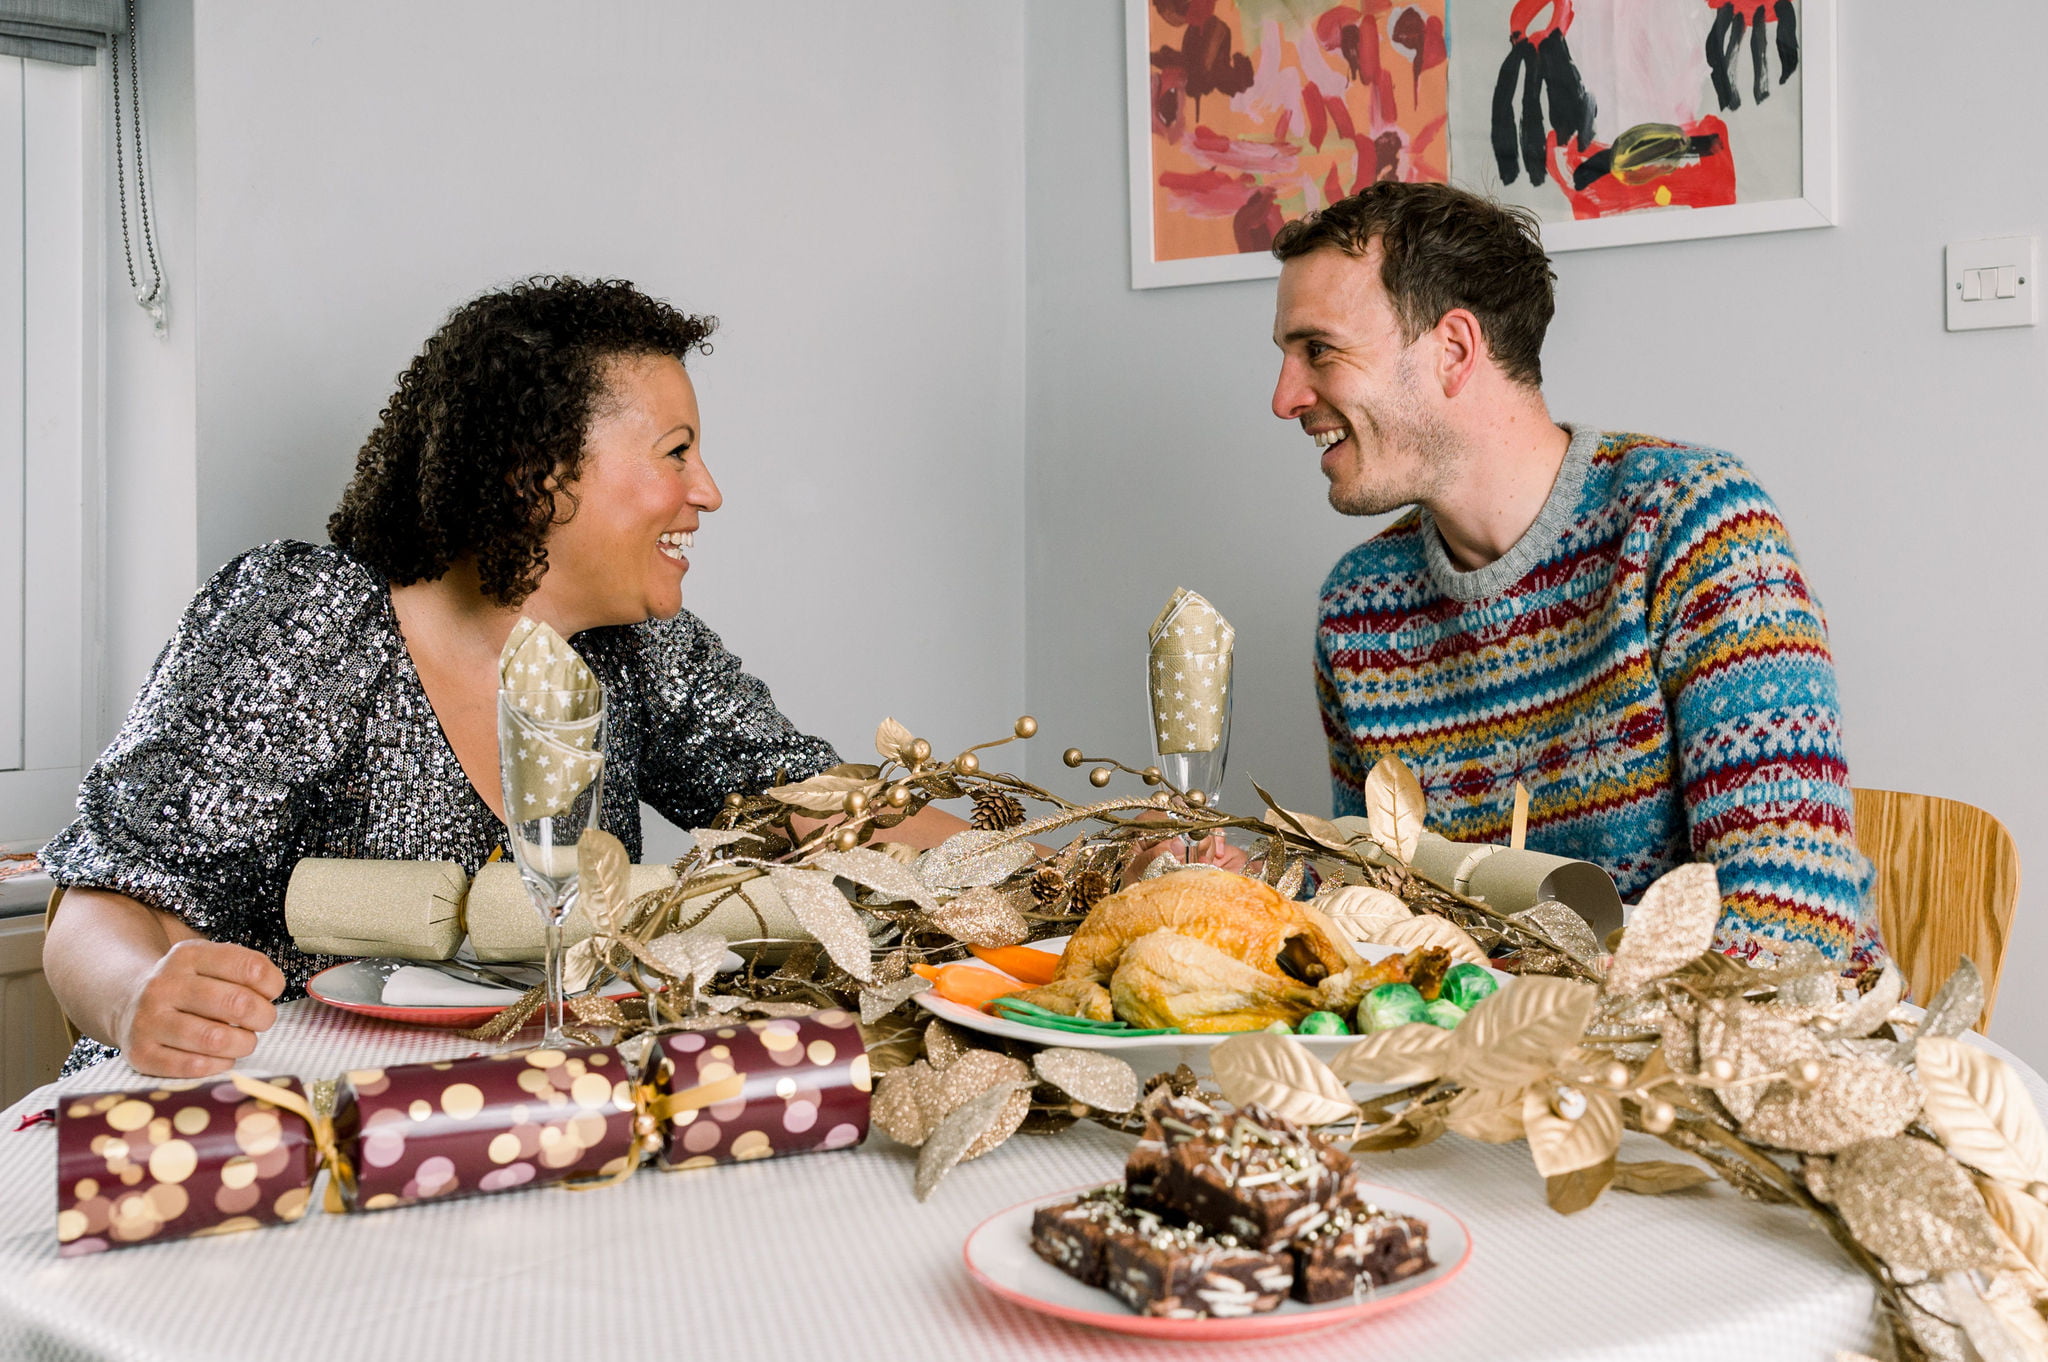 Charlotte and Luke (founders of Brownie and the Bean) are sat at a Christmas laid table. They are gazing lovingly into each other's eyes. There is a full Christmas spread of food including a roasted chicken and seasonal vegetables. There is a pile of Christmas brownies placed at the front. This photo forms as part of their Christmas in July 2023 campaign.